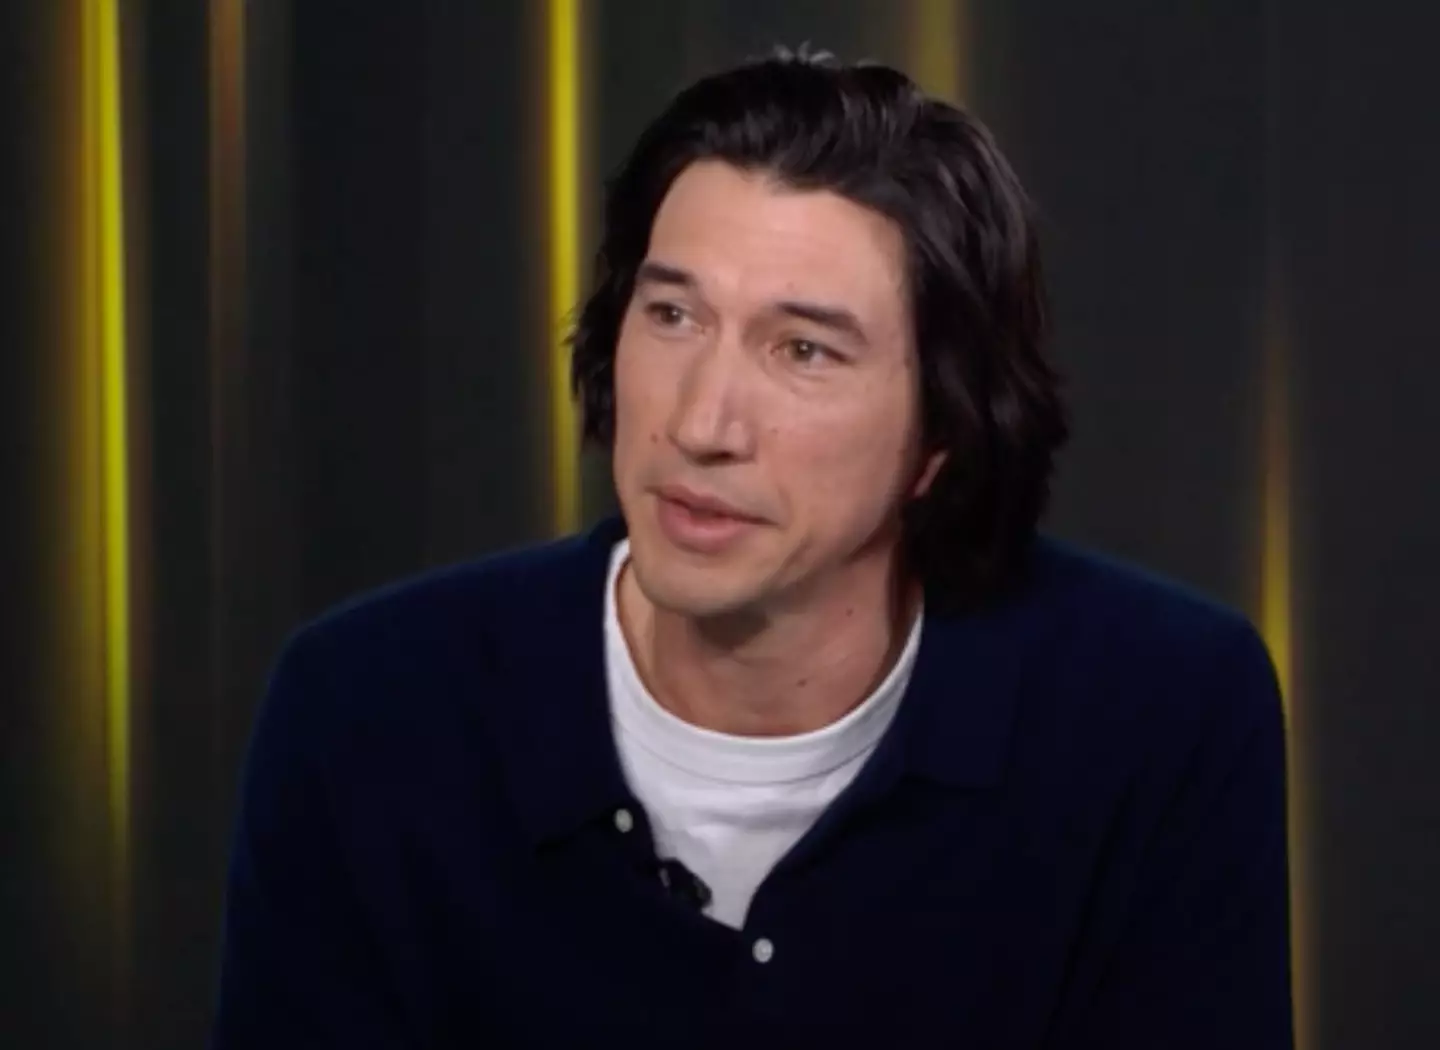 Adam Driver has been one of the most well-received new additions to the franchise.